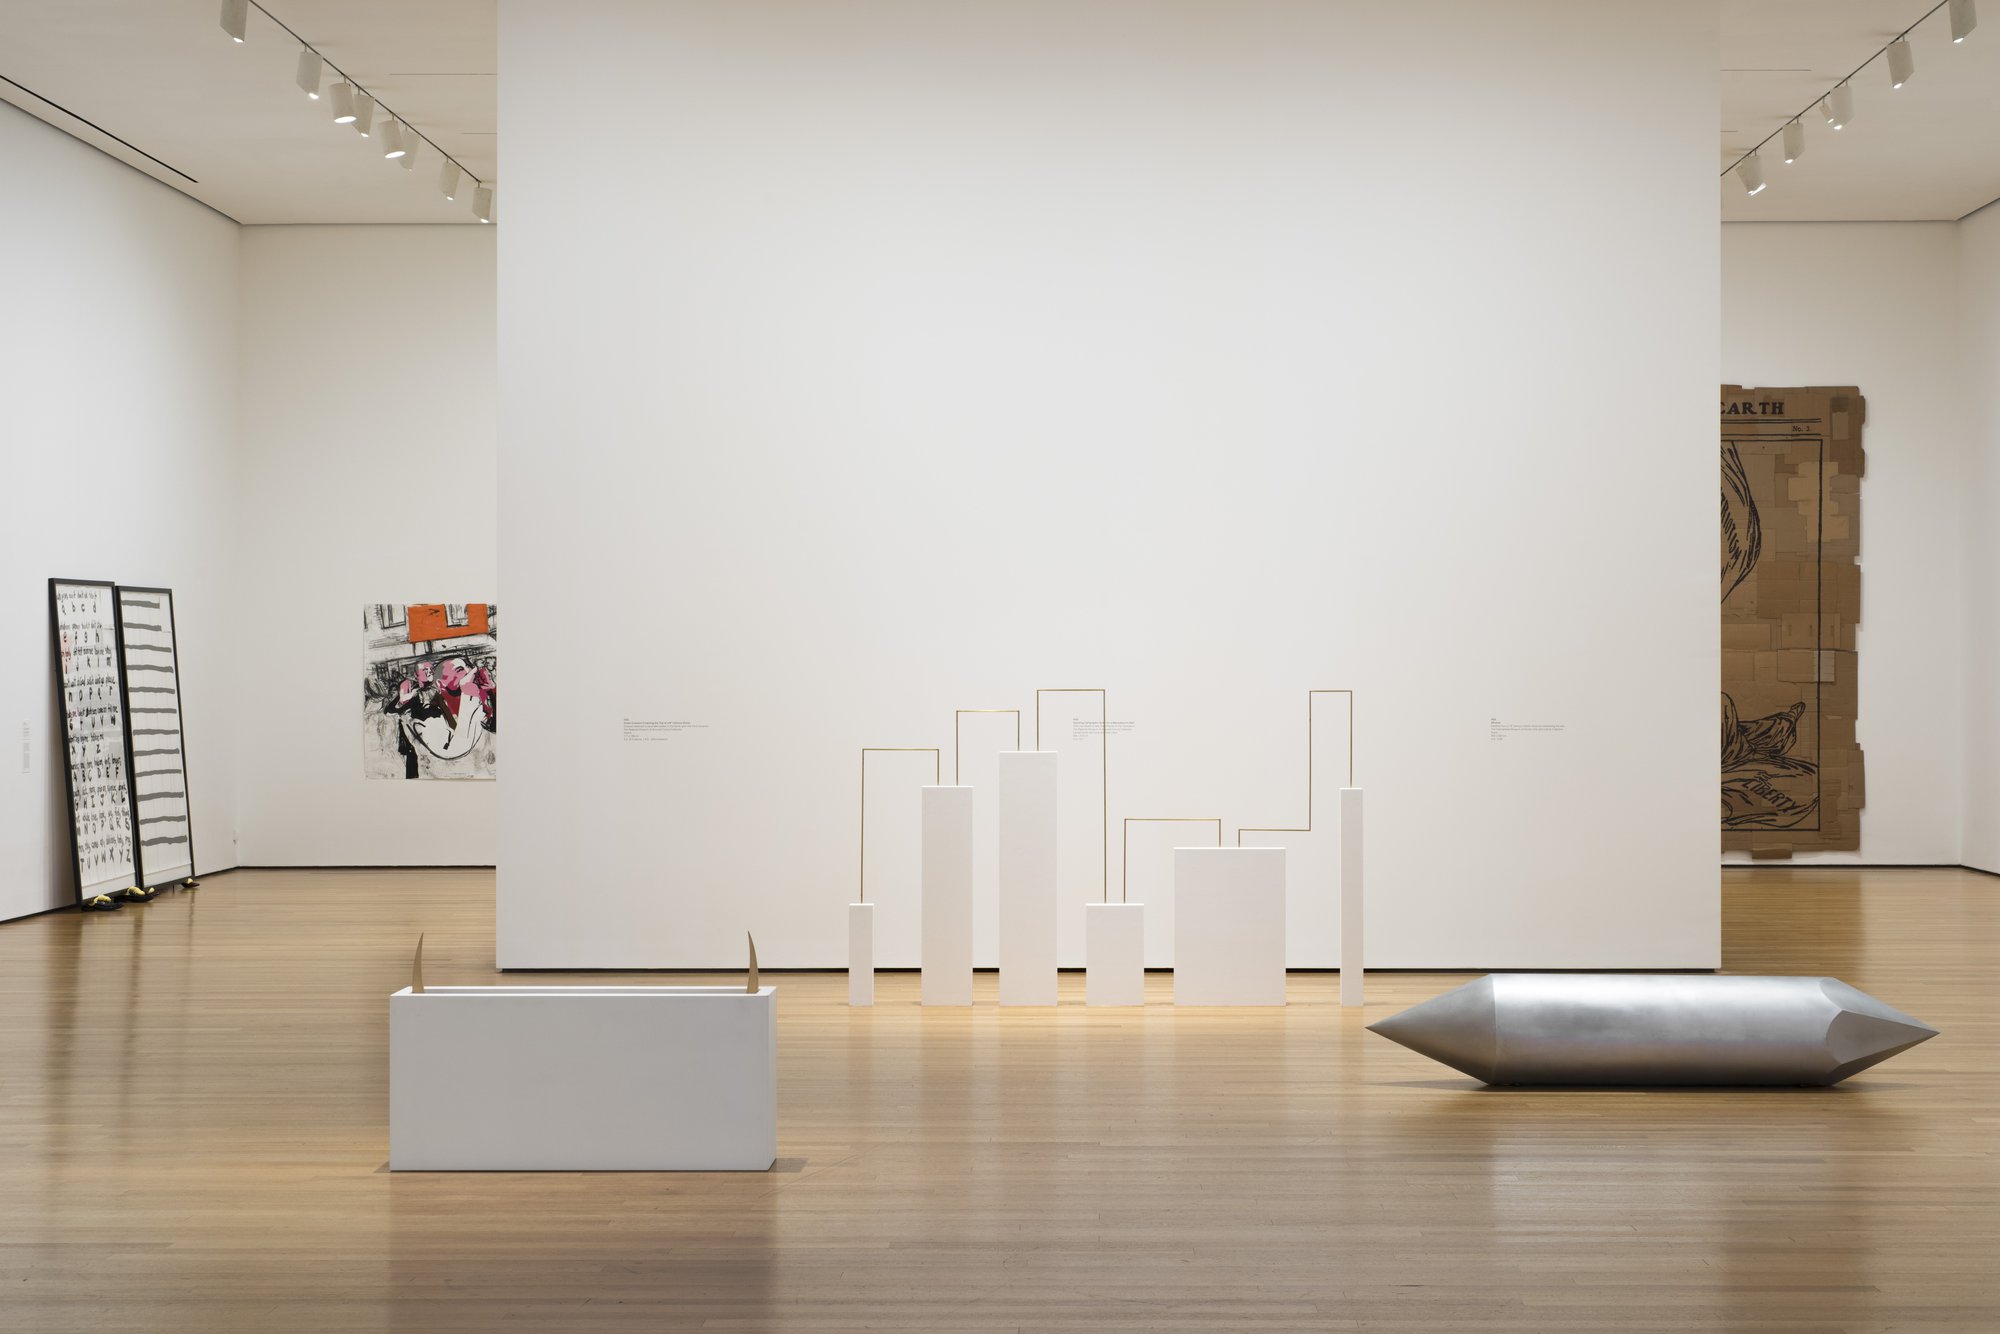 Iman Issa, Heritage Studies. Installation view, Unfinished Conversations: New Works from the Collection, MoMA, New York, 2017